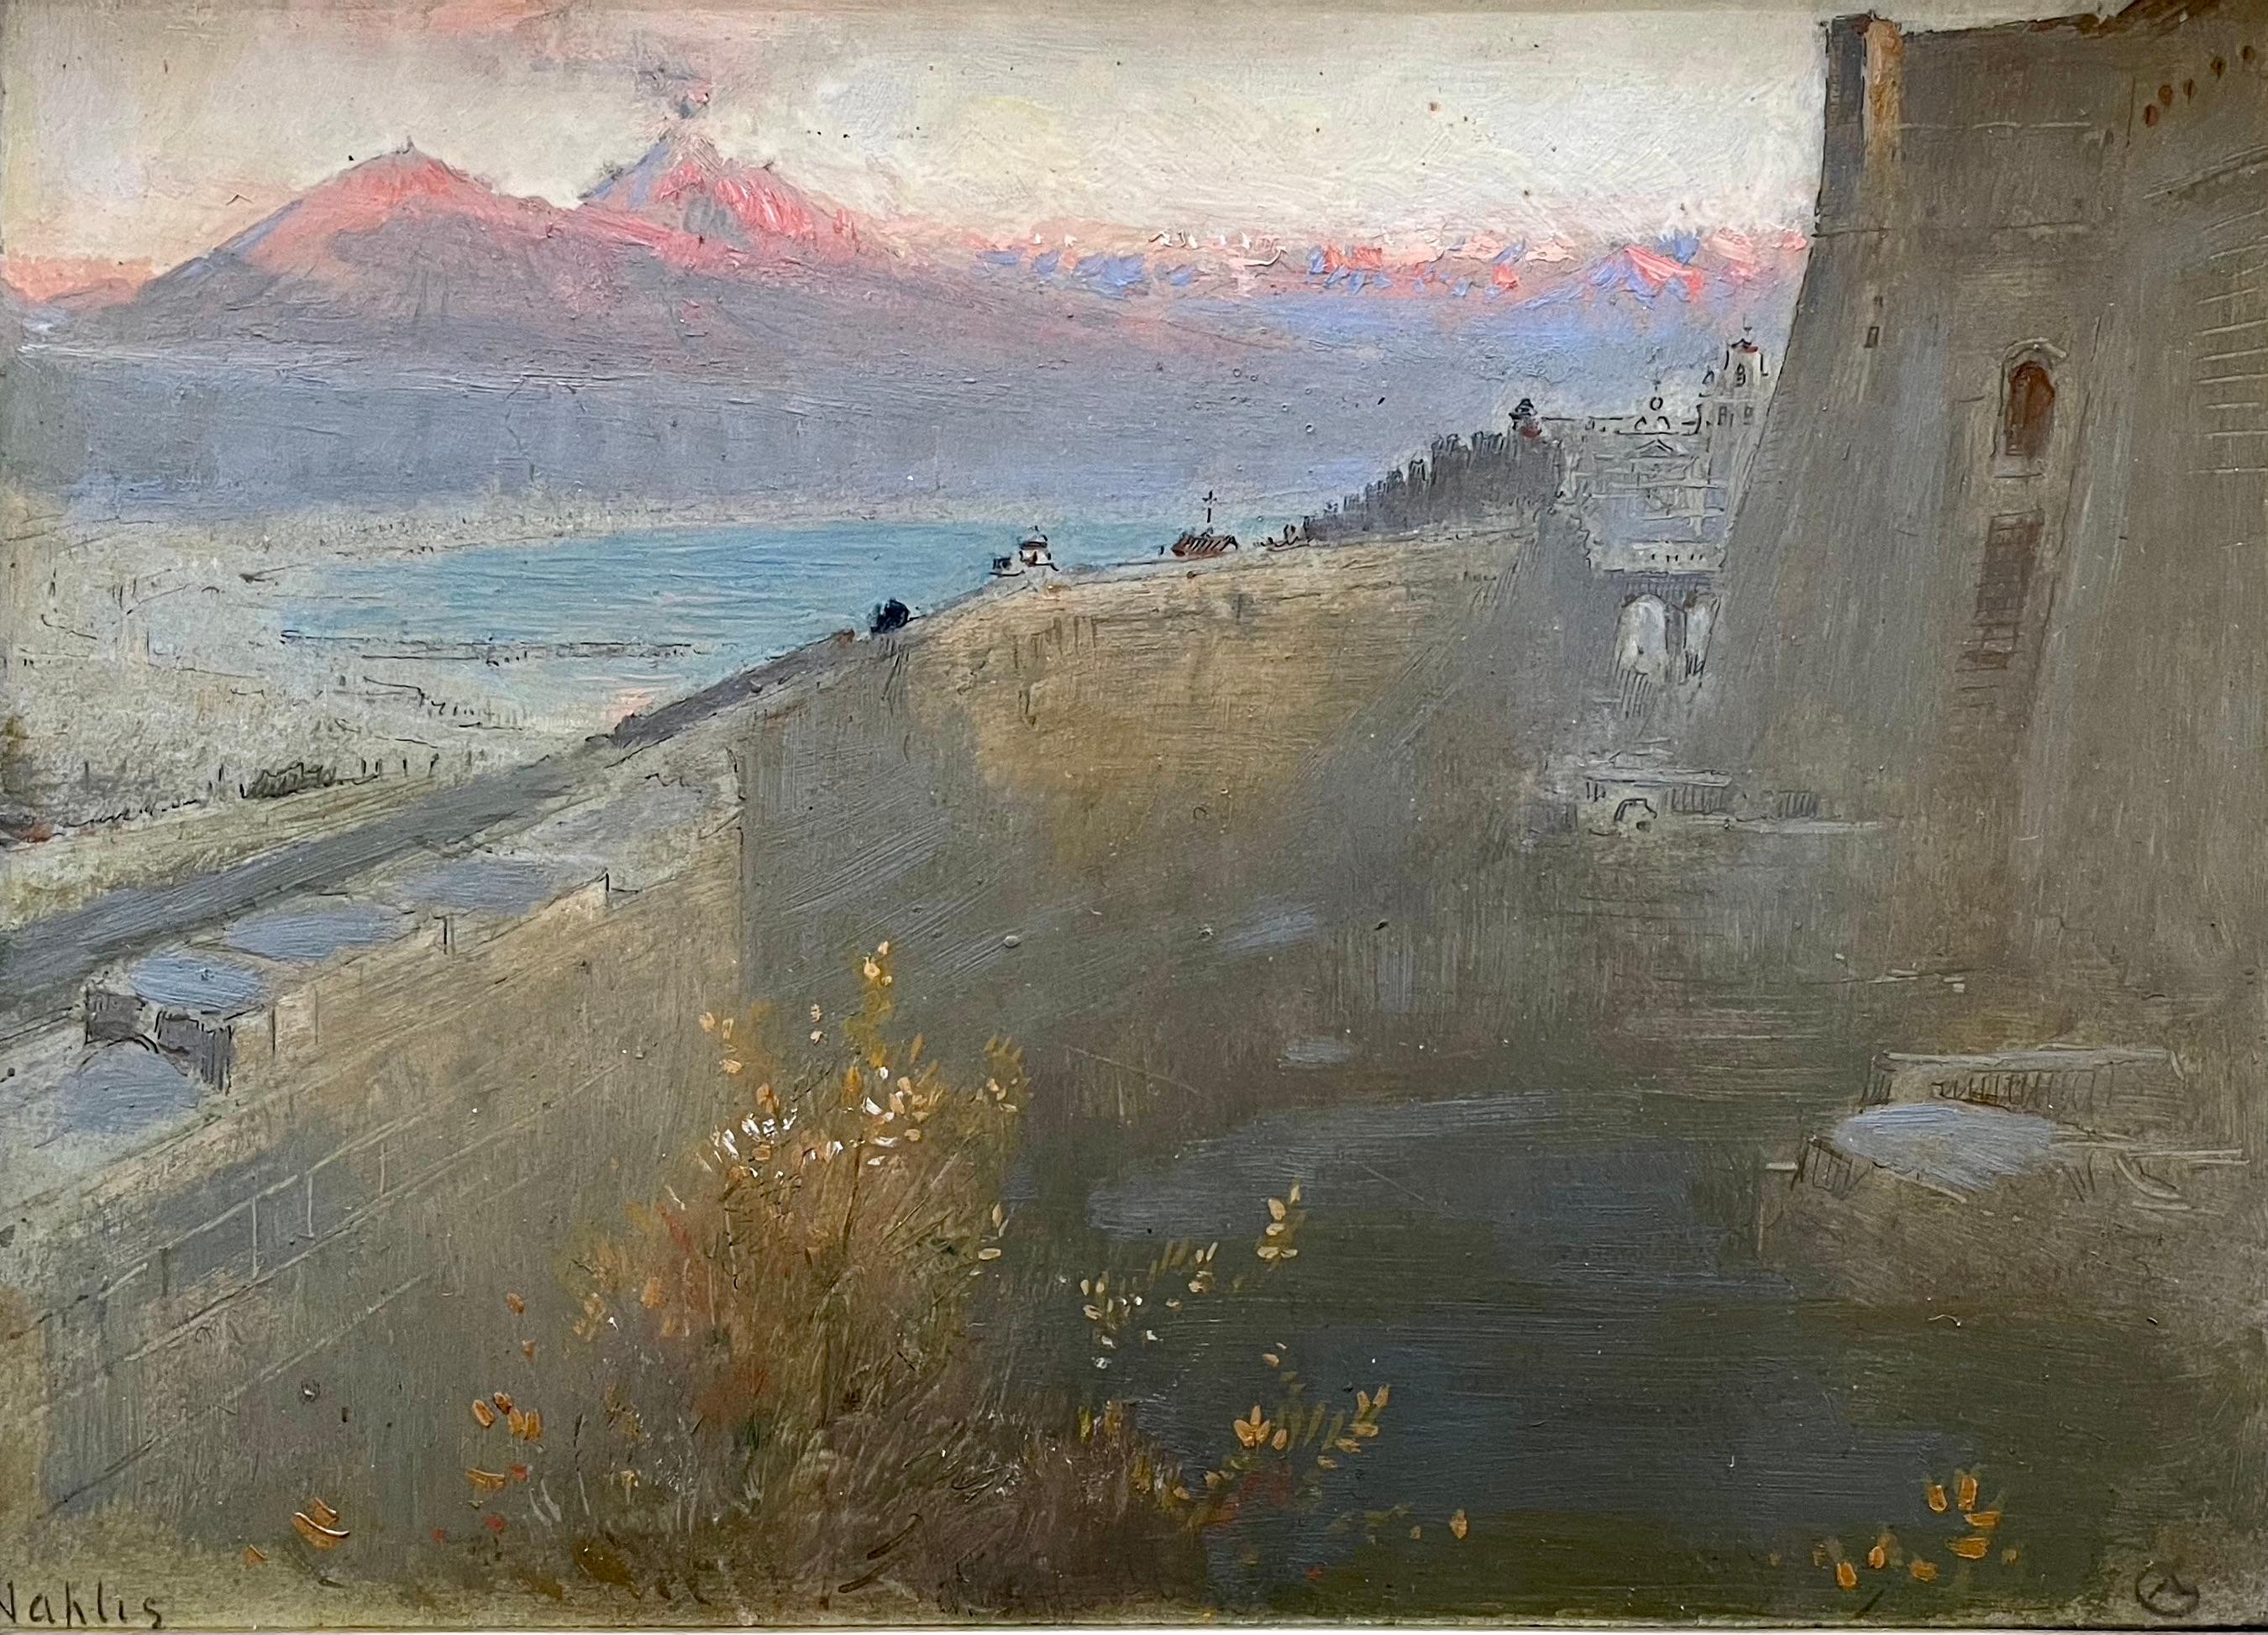 ALBERT GOODWIN, RWS
(1845-1932)

Naples

Signed with monogram l.r. and inscribed with title l.l.
Oil on board
Framed

19 by 26 cm., 7 ½ by 10 ¼ in.
(frame size 40 by 48 cm., 15 ¾ by 19 in.)

Provenance:
Tom Coates, NEAC, RWS and Mary Jackson, NEAC,